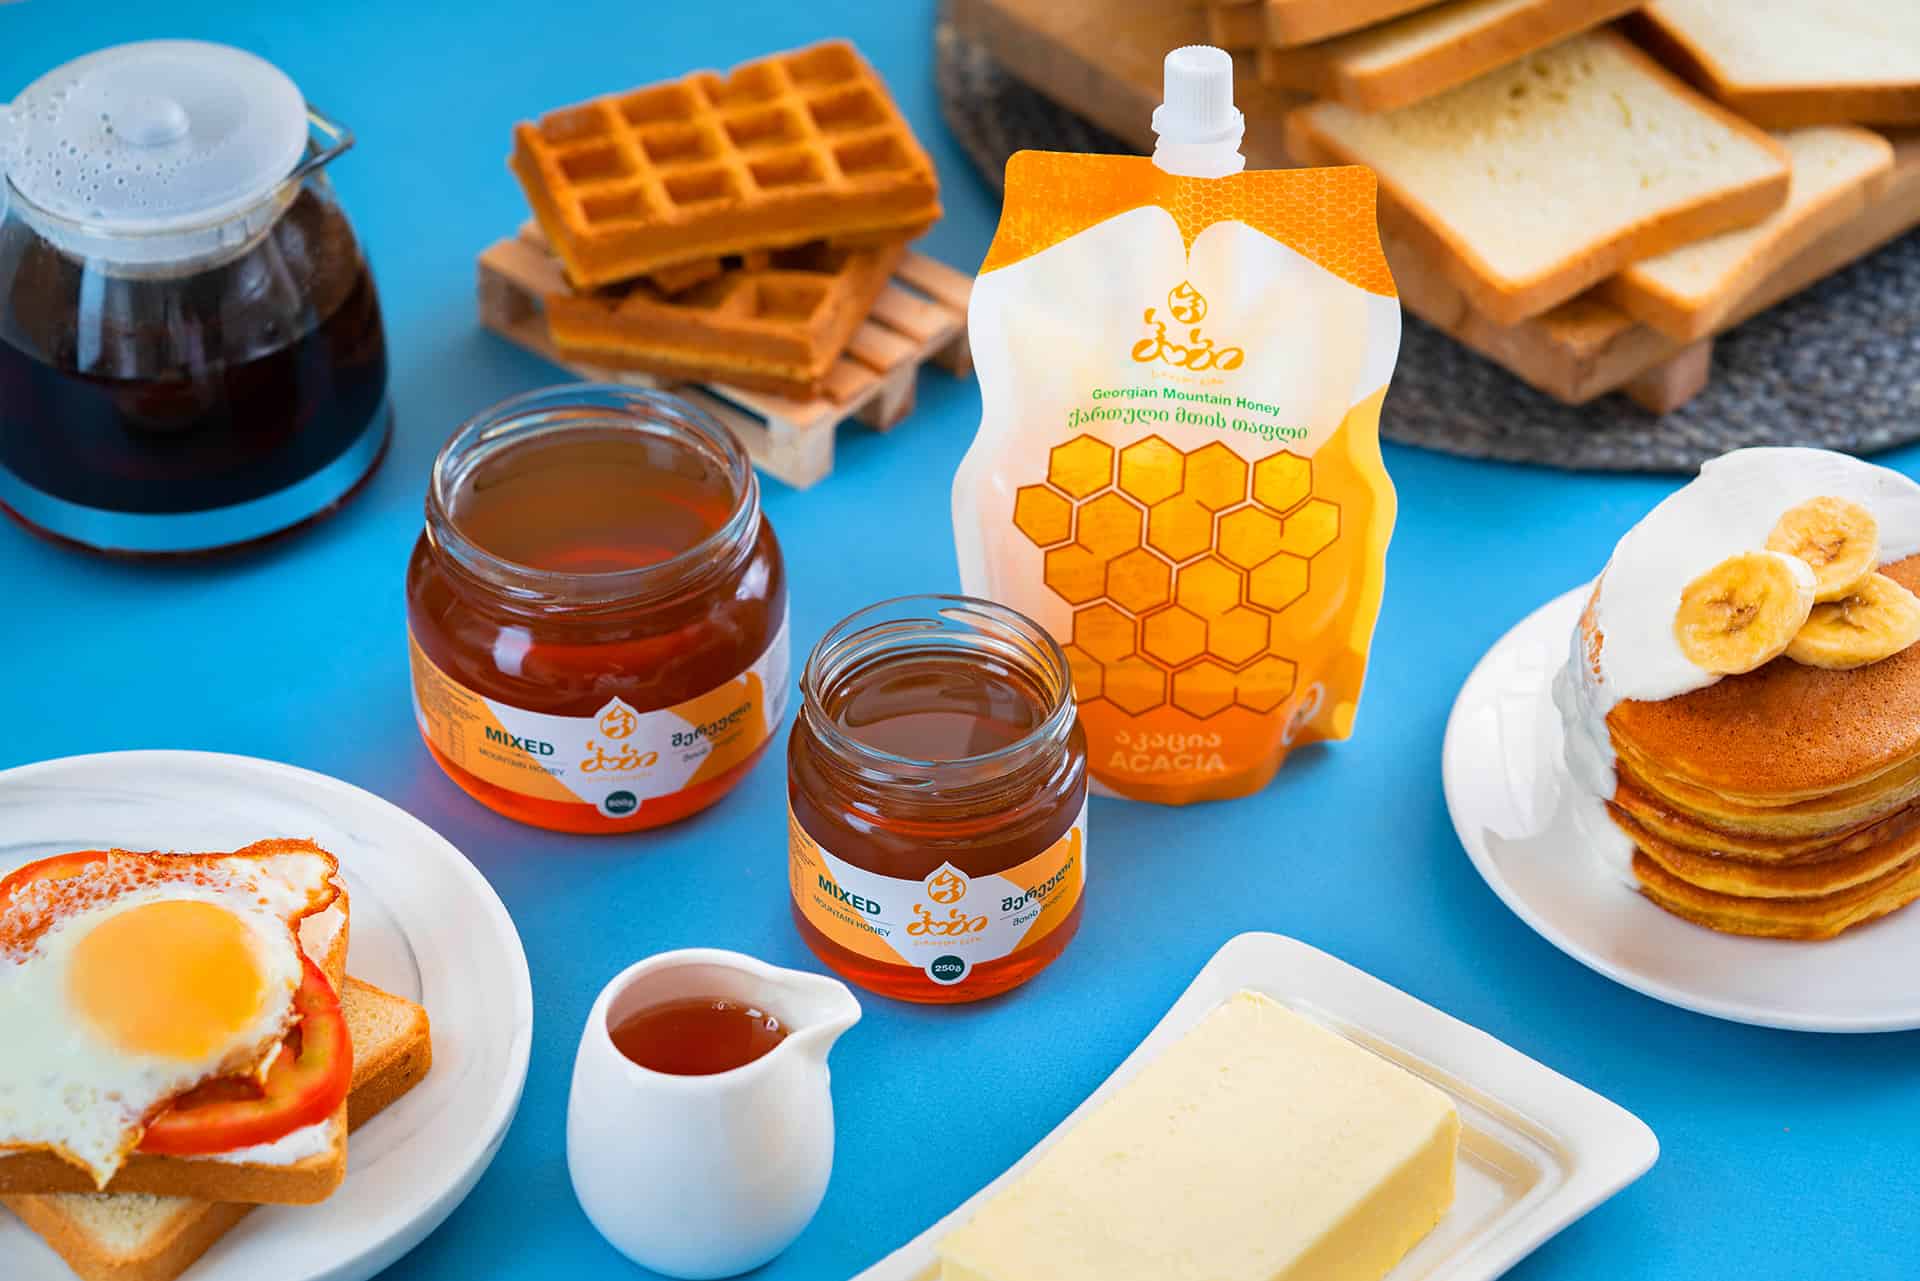 HOBY - purest and most natural honey